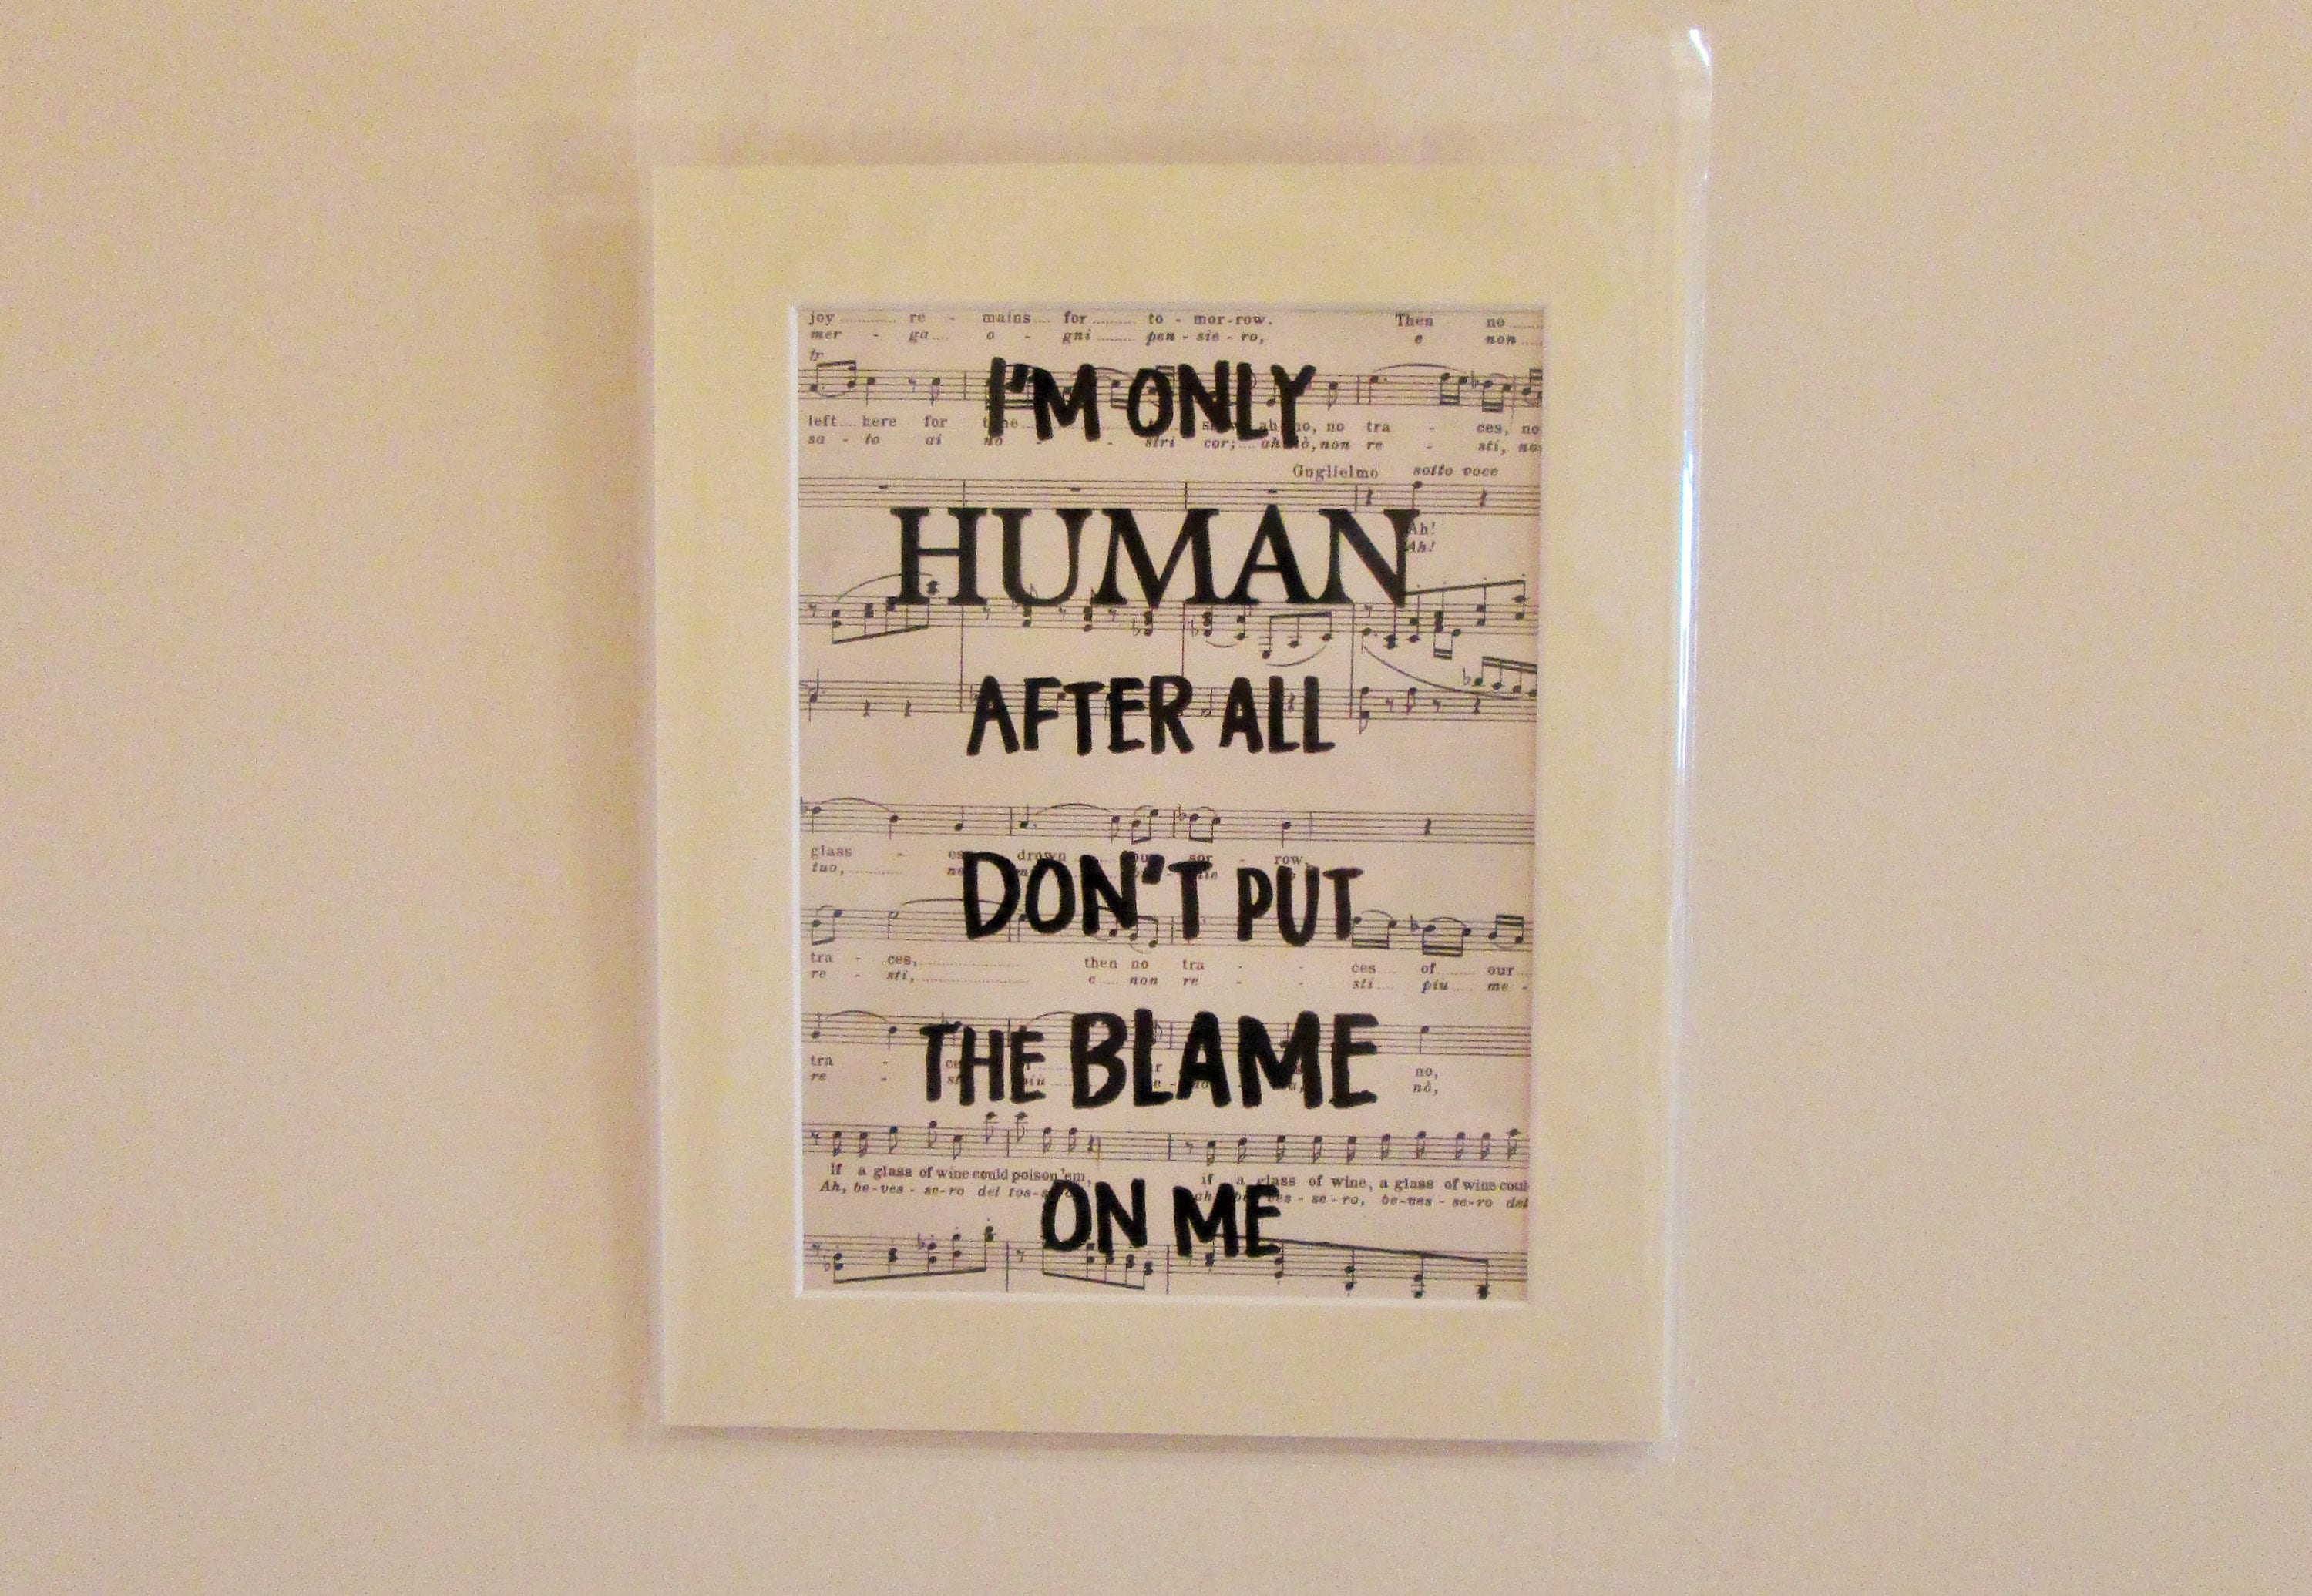 I'M only Human after all текст. I am only Human after all. I am only Human кухня. Human after all. Only human after all